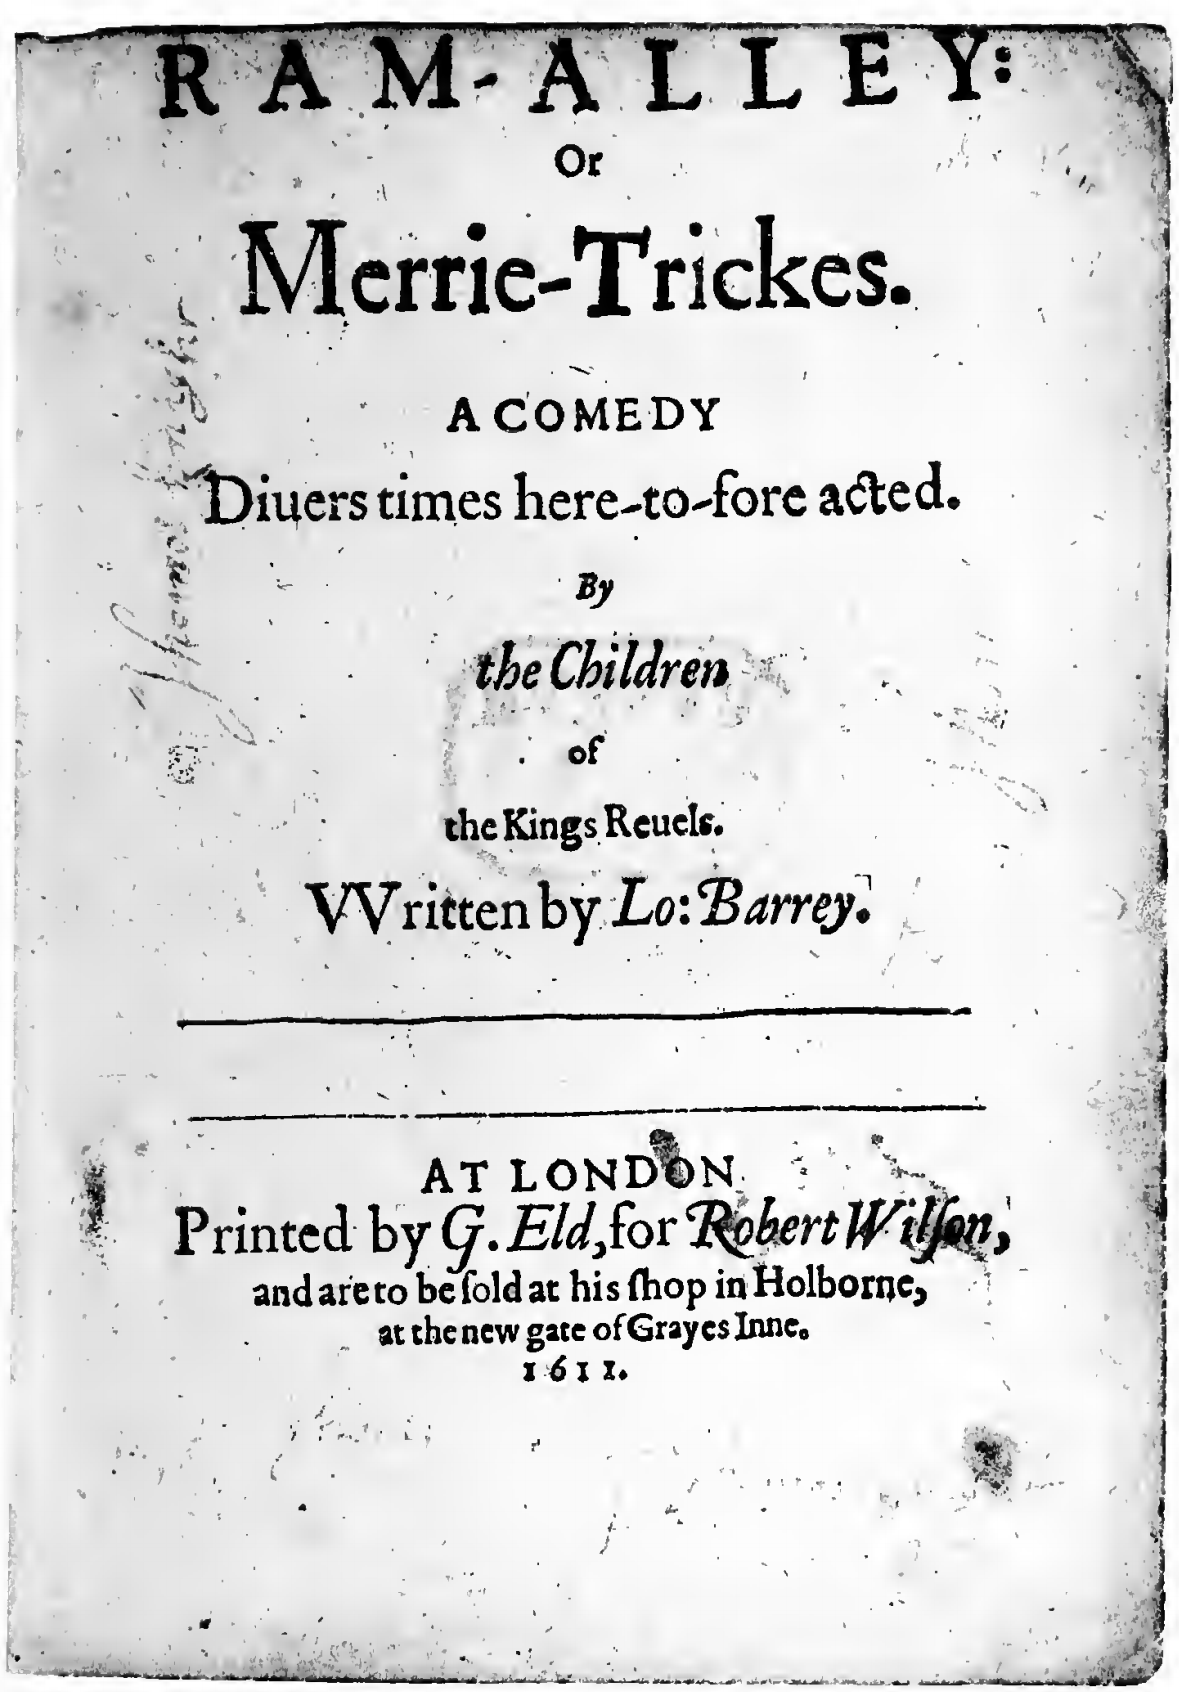 Title page of Lording Barry’s Ram Alley (1607-8). Image courtesy of Wikimedia Commons.